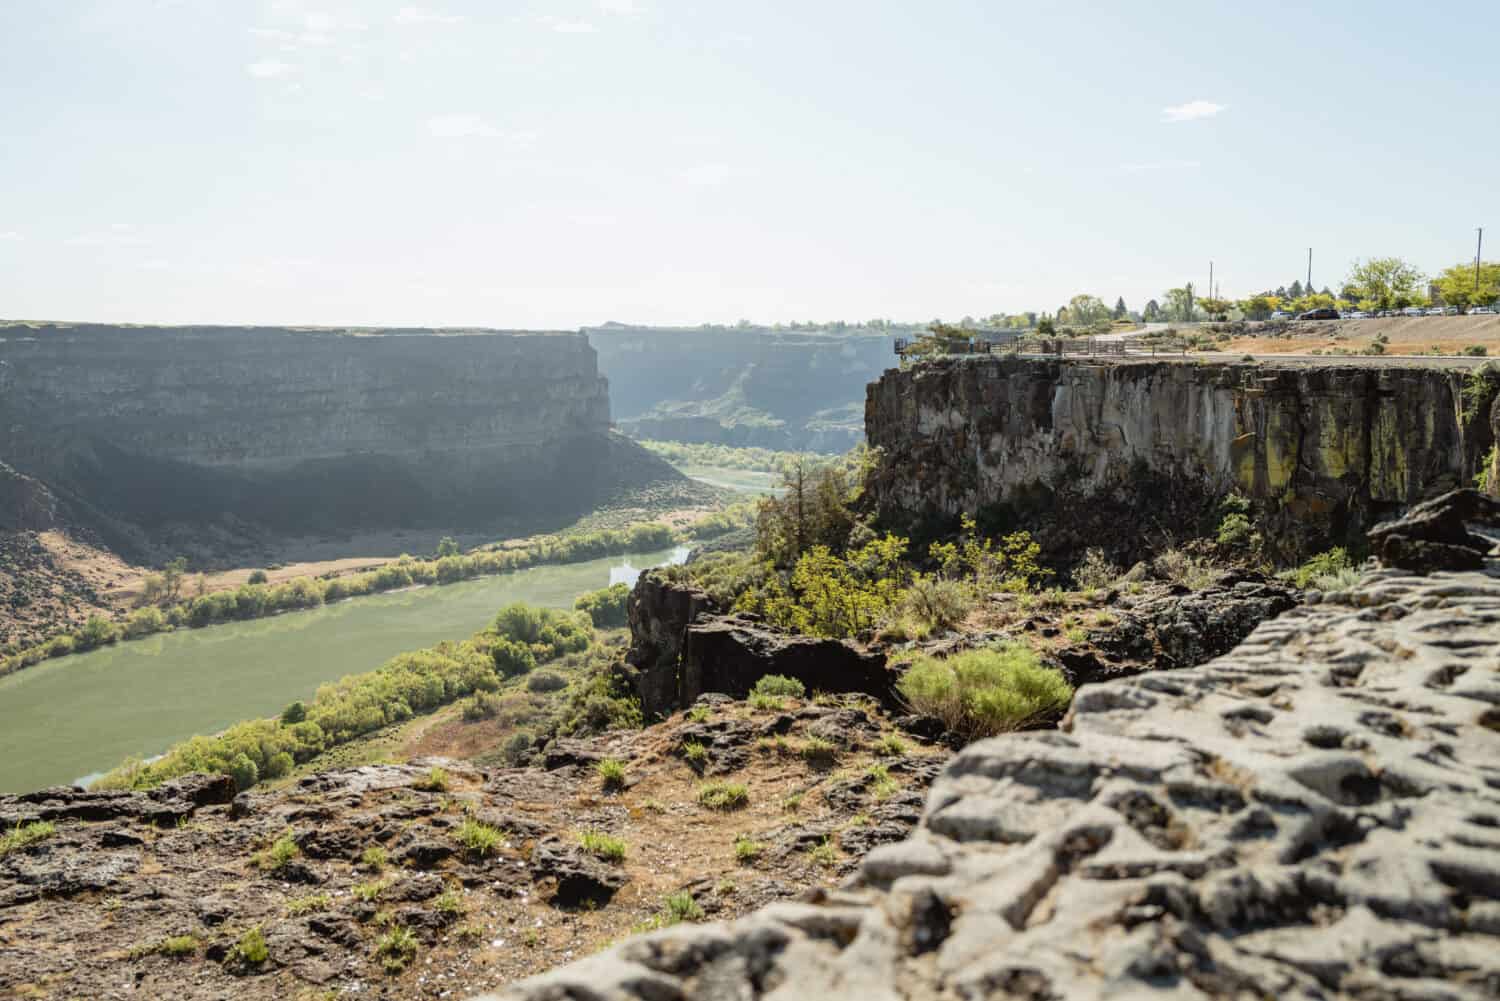 Things To Do In Idaho - Walk the Snake River Canyon Rim Trail